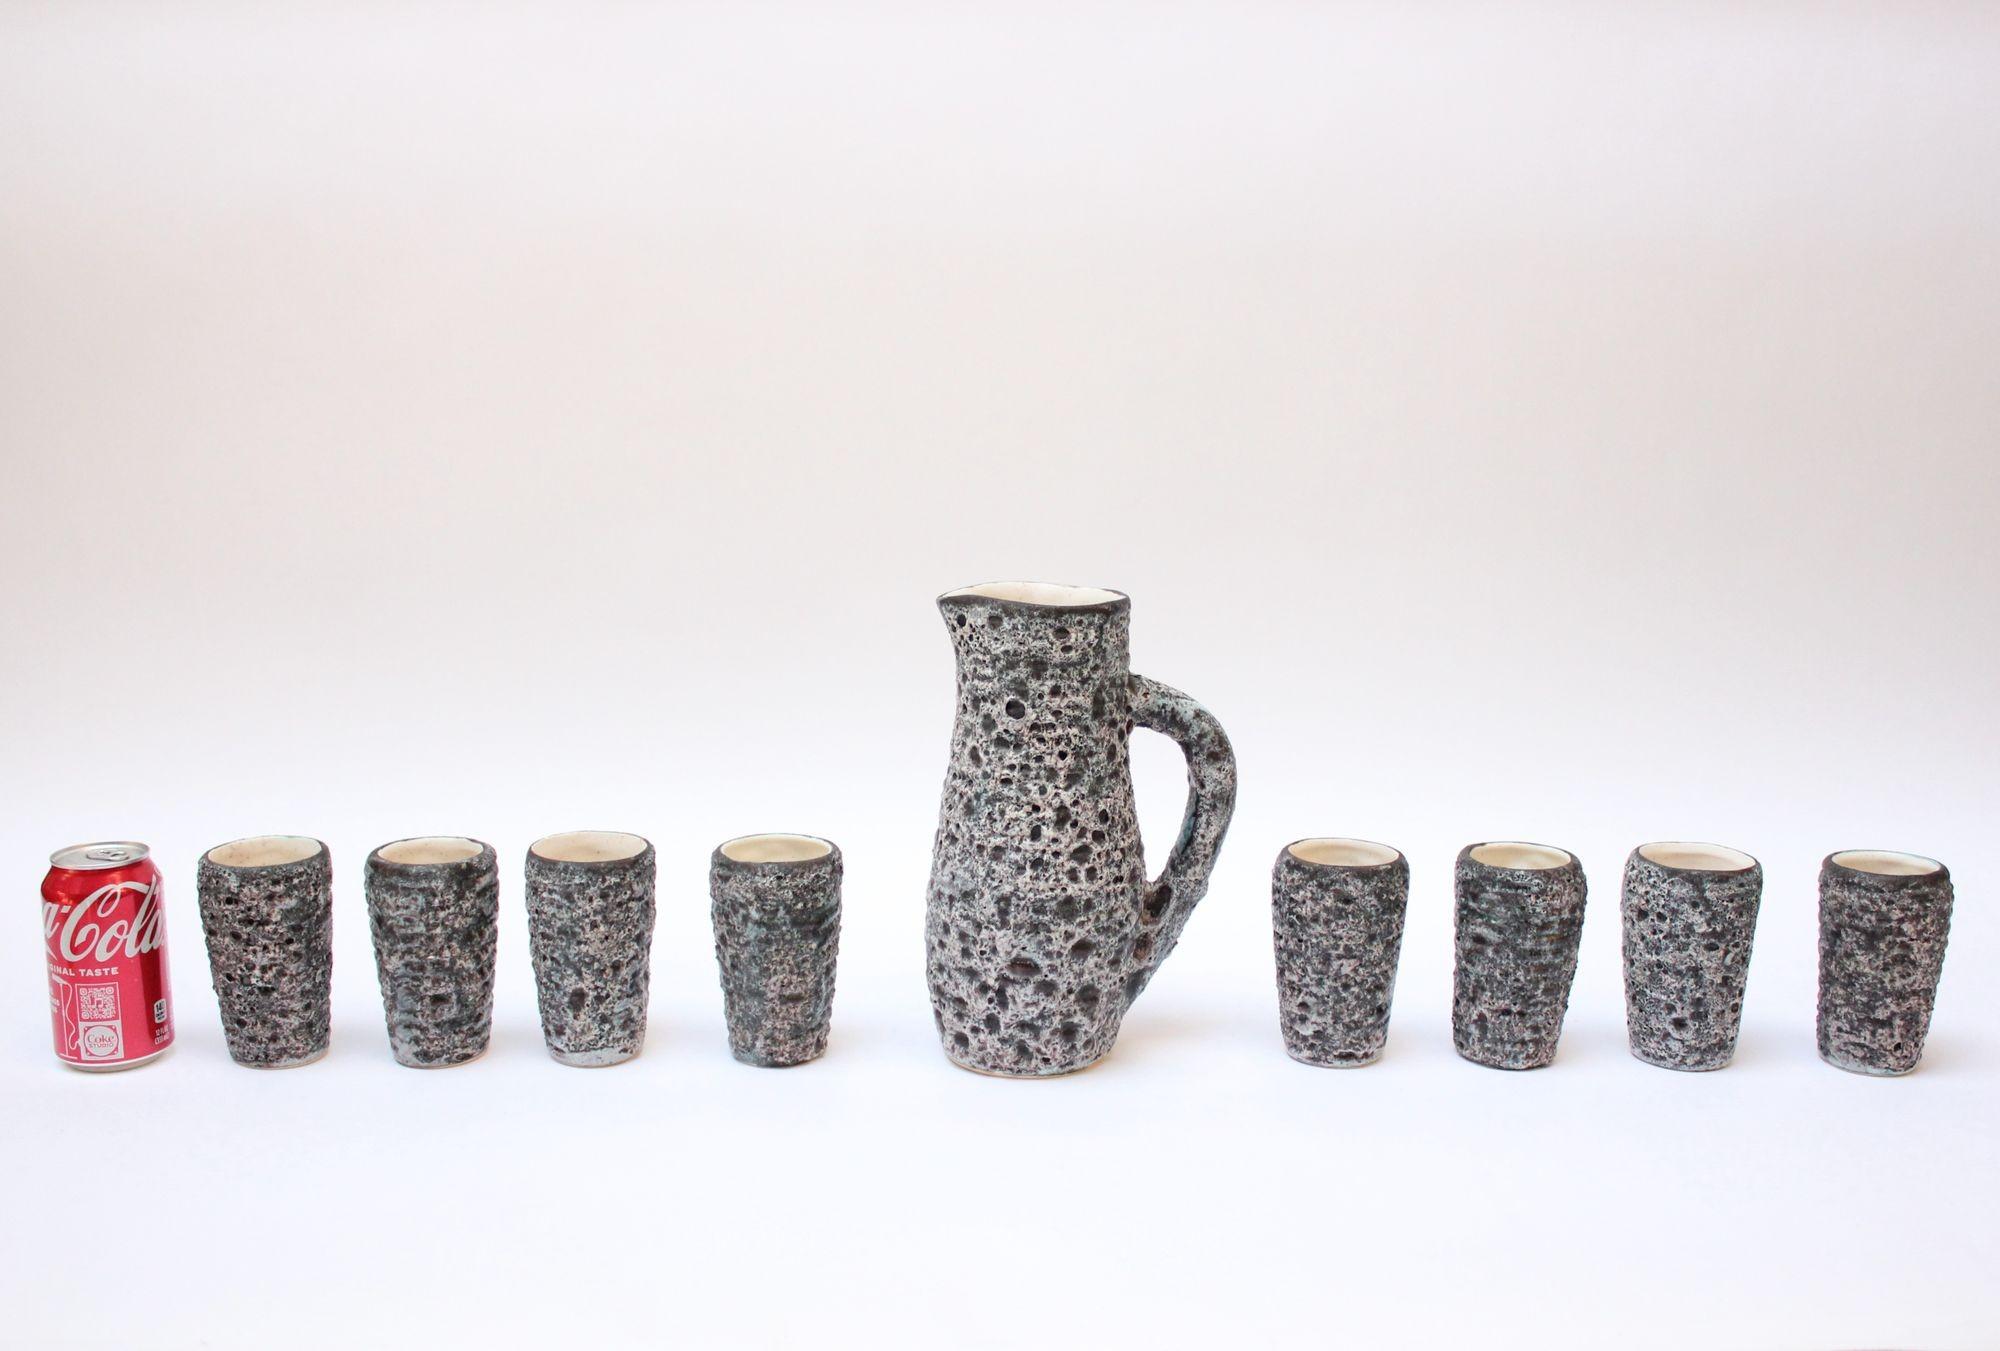 Heavily textured ceramic nine-piece drink serving set including eight cups/tumblers and a single pitcher (ca. 1960s, Annecy, France). 
Fat volcano lava glaze in charcoal and white with subtle hues of turquoise and pink. 
Each piece is signed